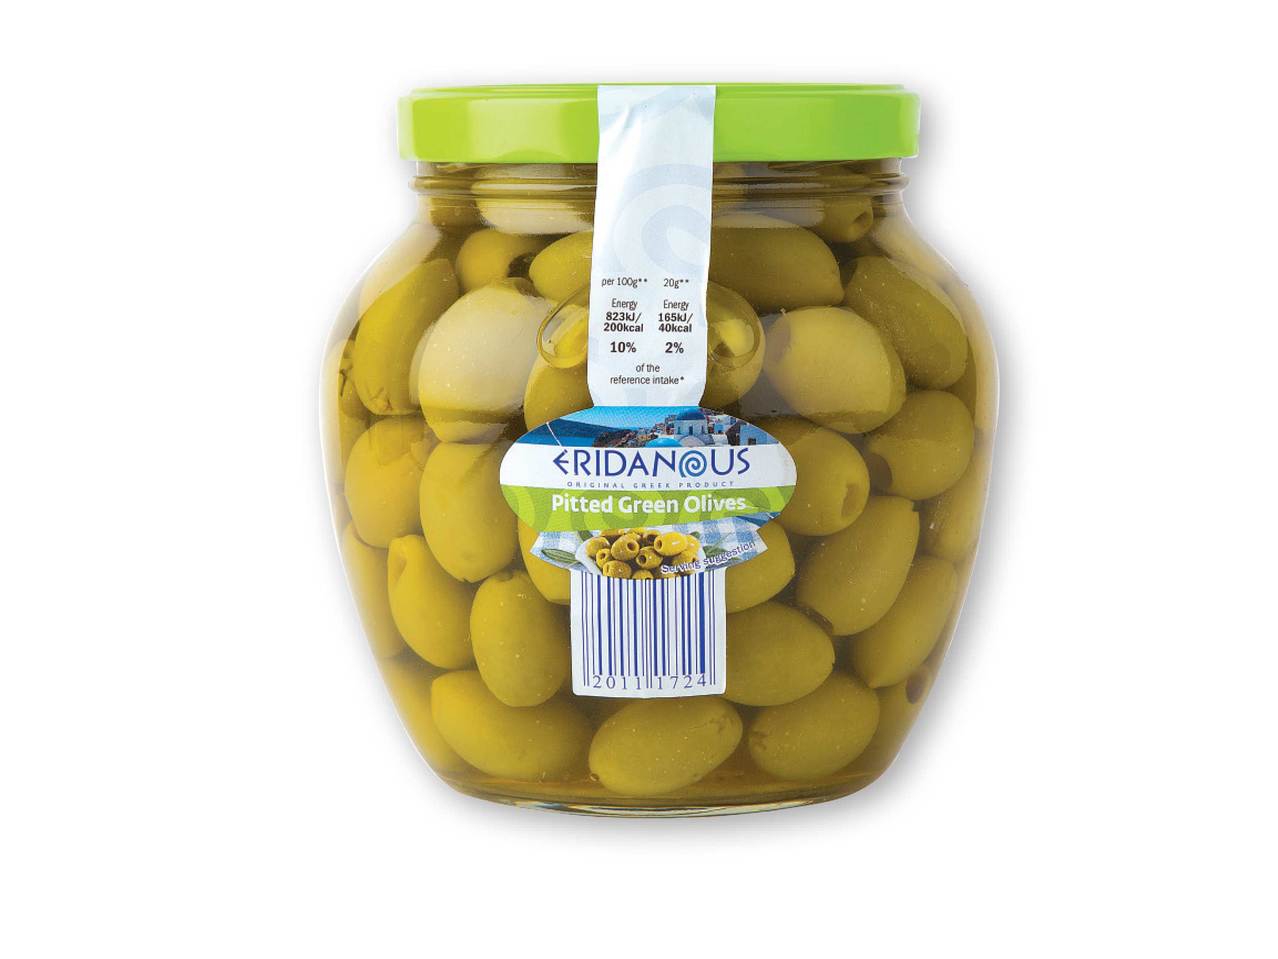 ERIDANOUS Pitted Green Olives